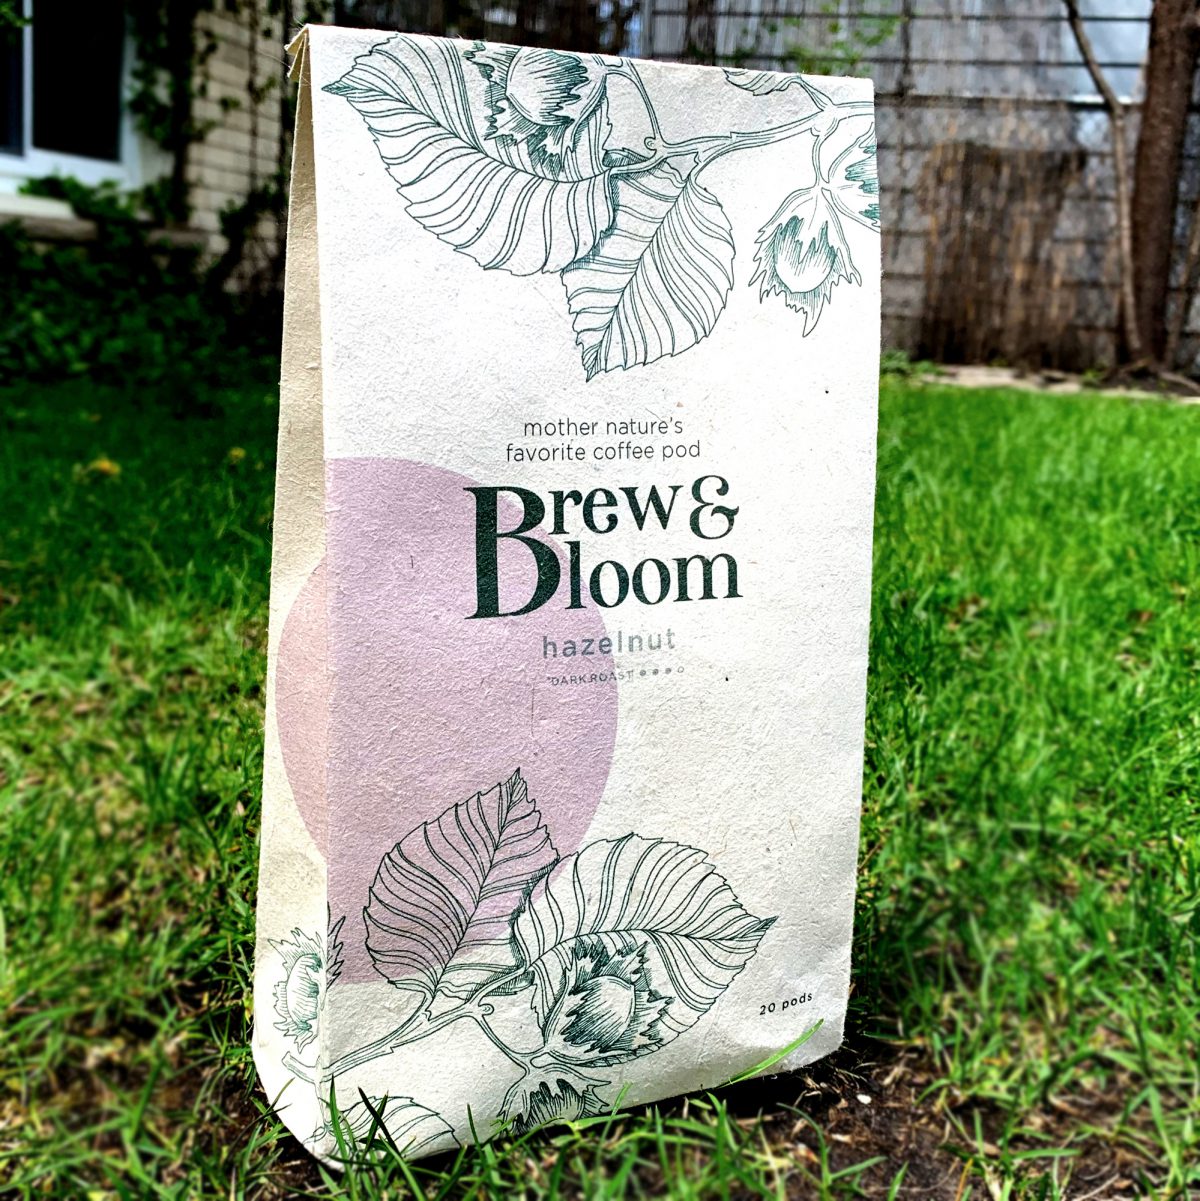 Brew & Bloom: Mother Nature’s Favorite Coffee Pod